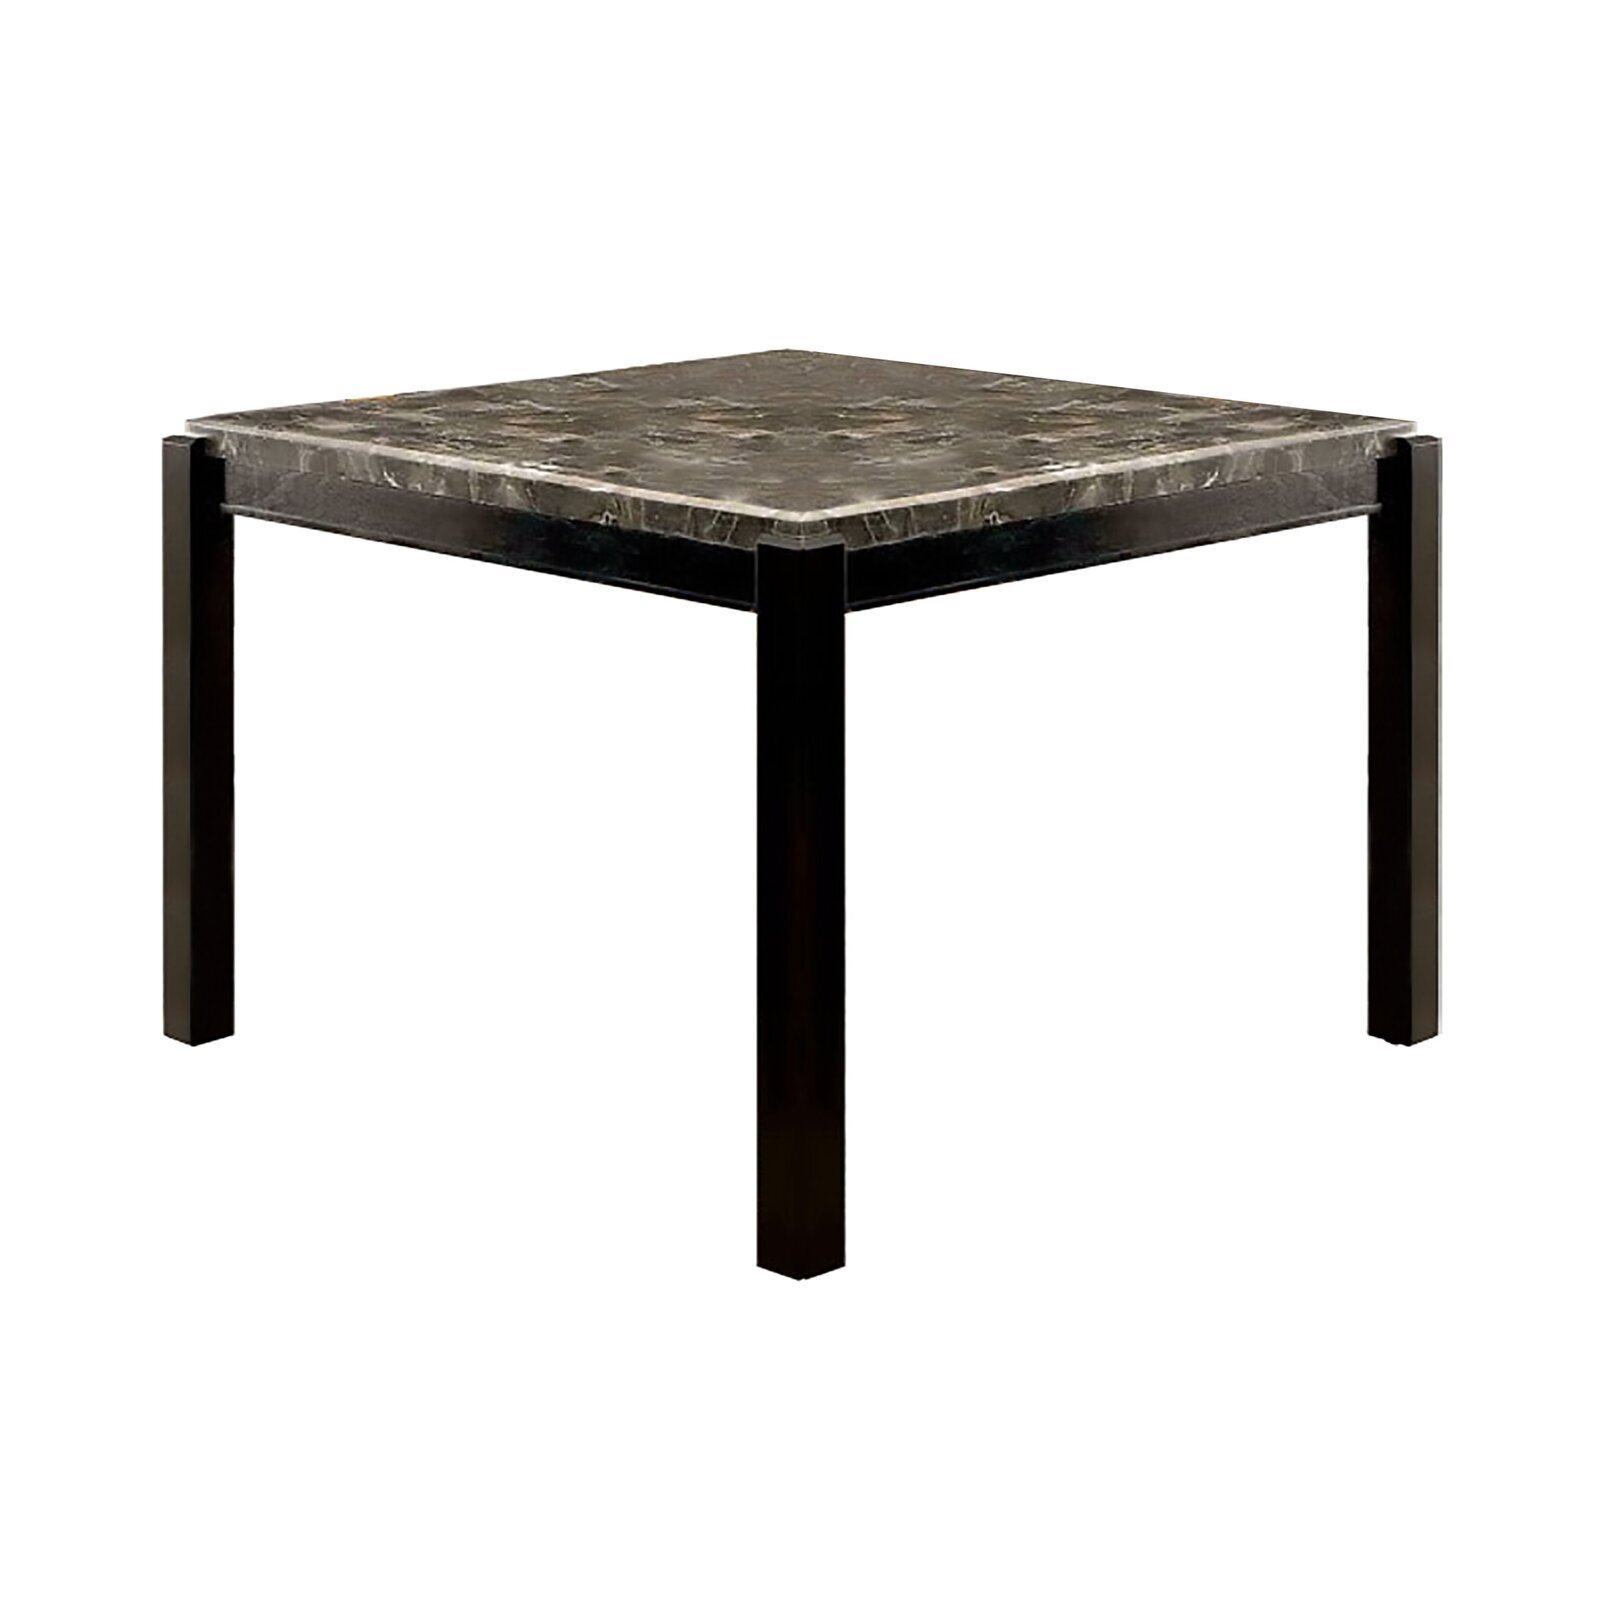 Marble table for 8 in a square design